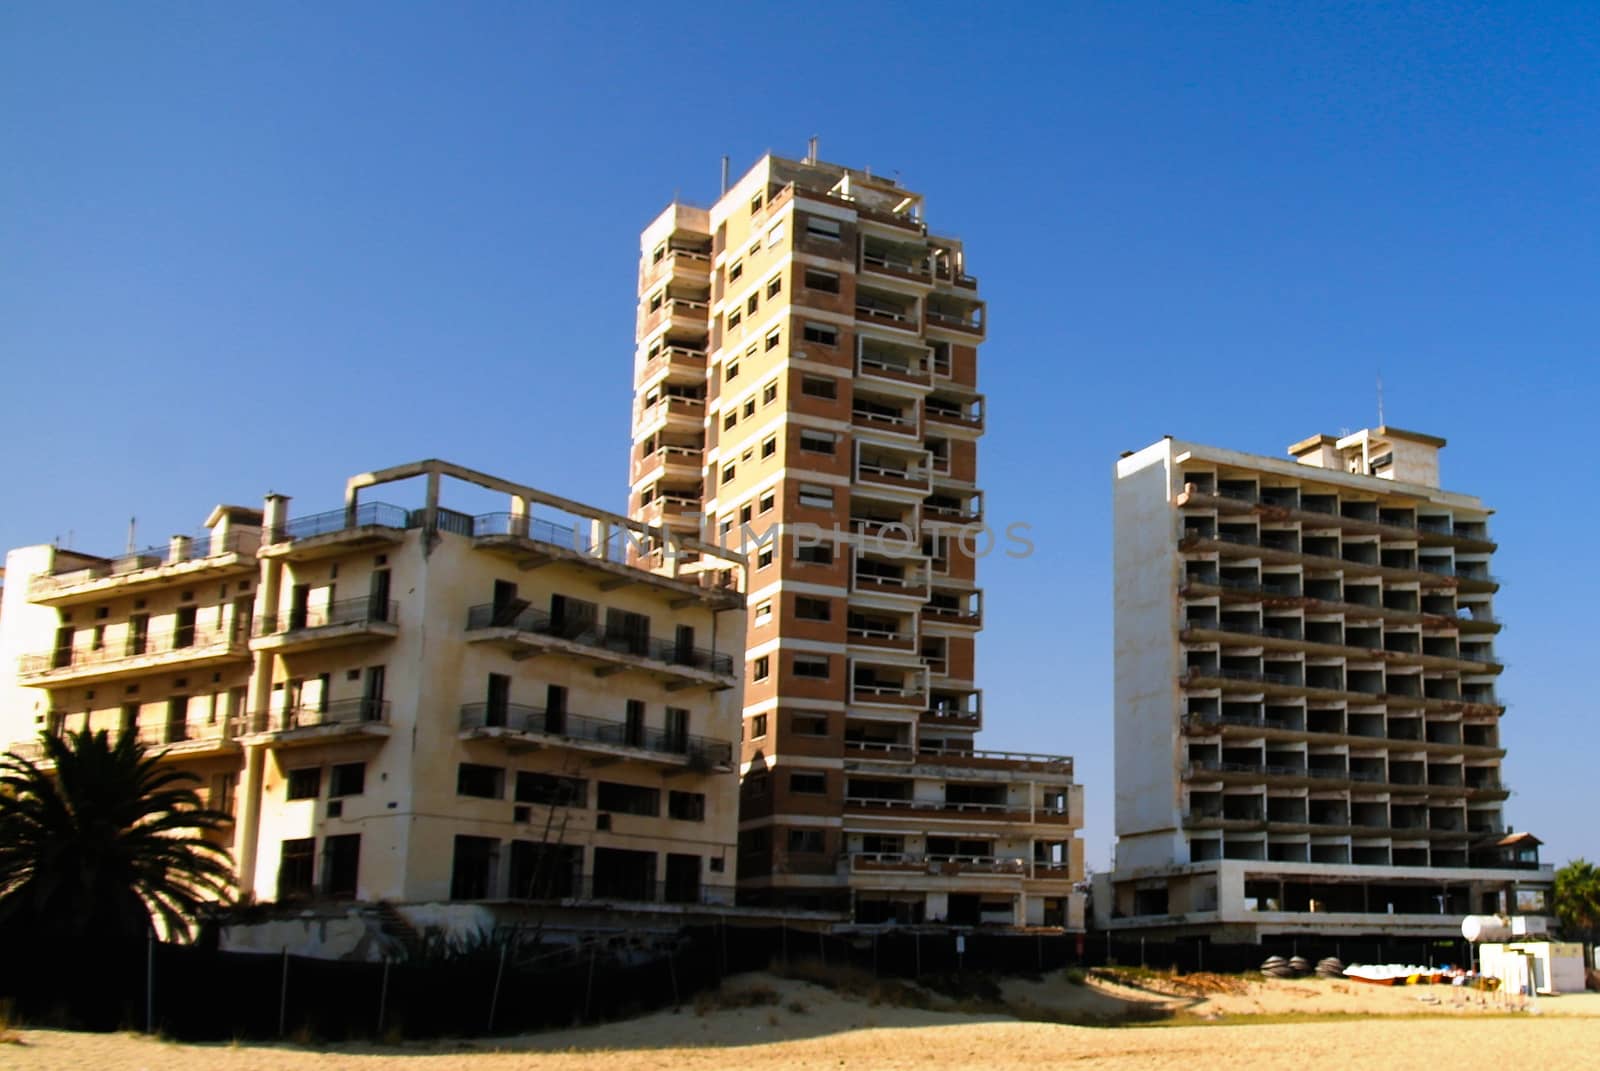 exterior view to Varosha, abandoned district of Famagusta, Nothern Cyprus by homocosmicos